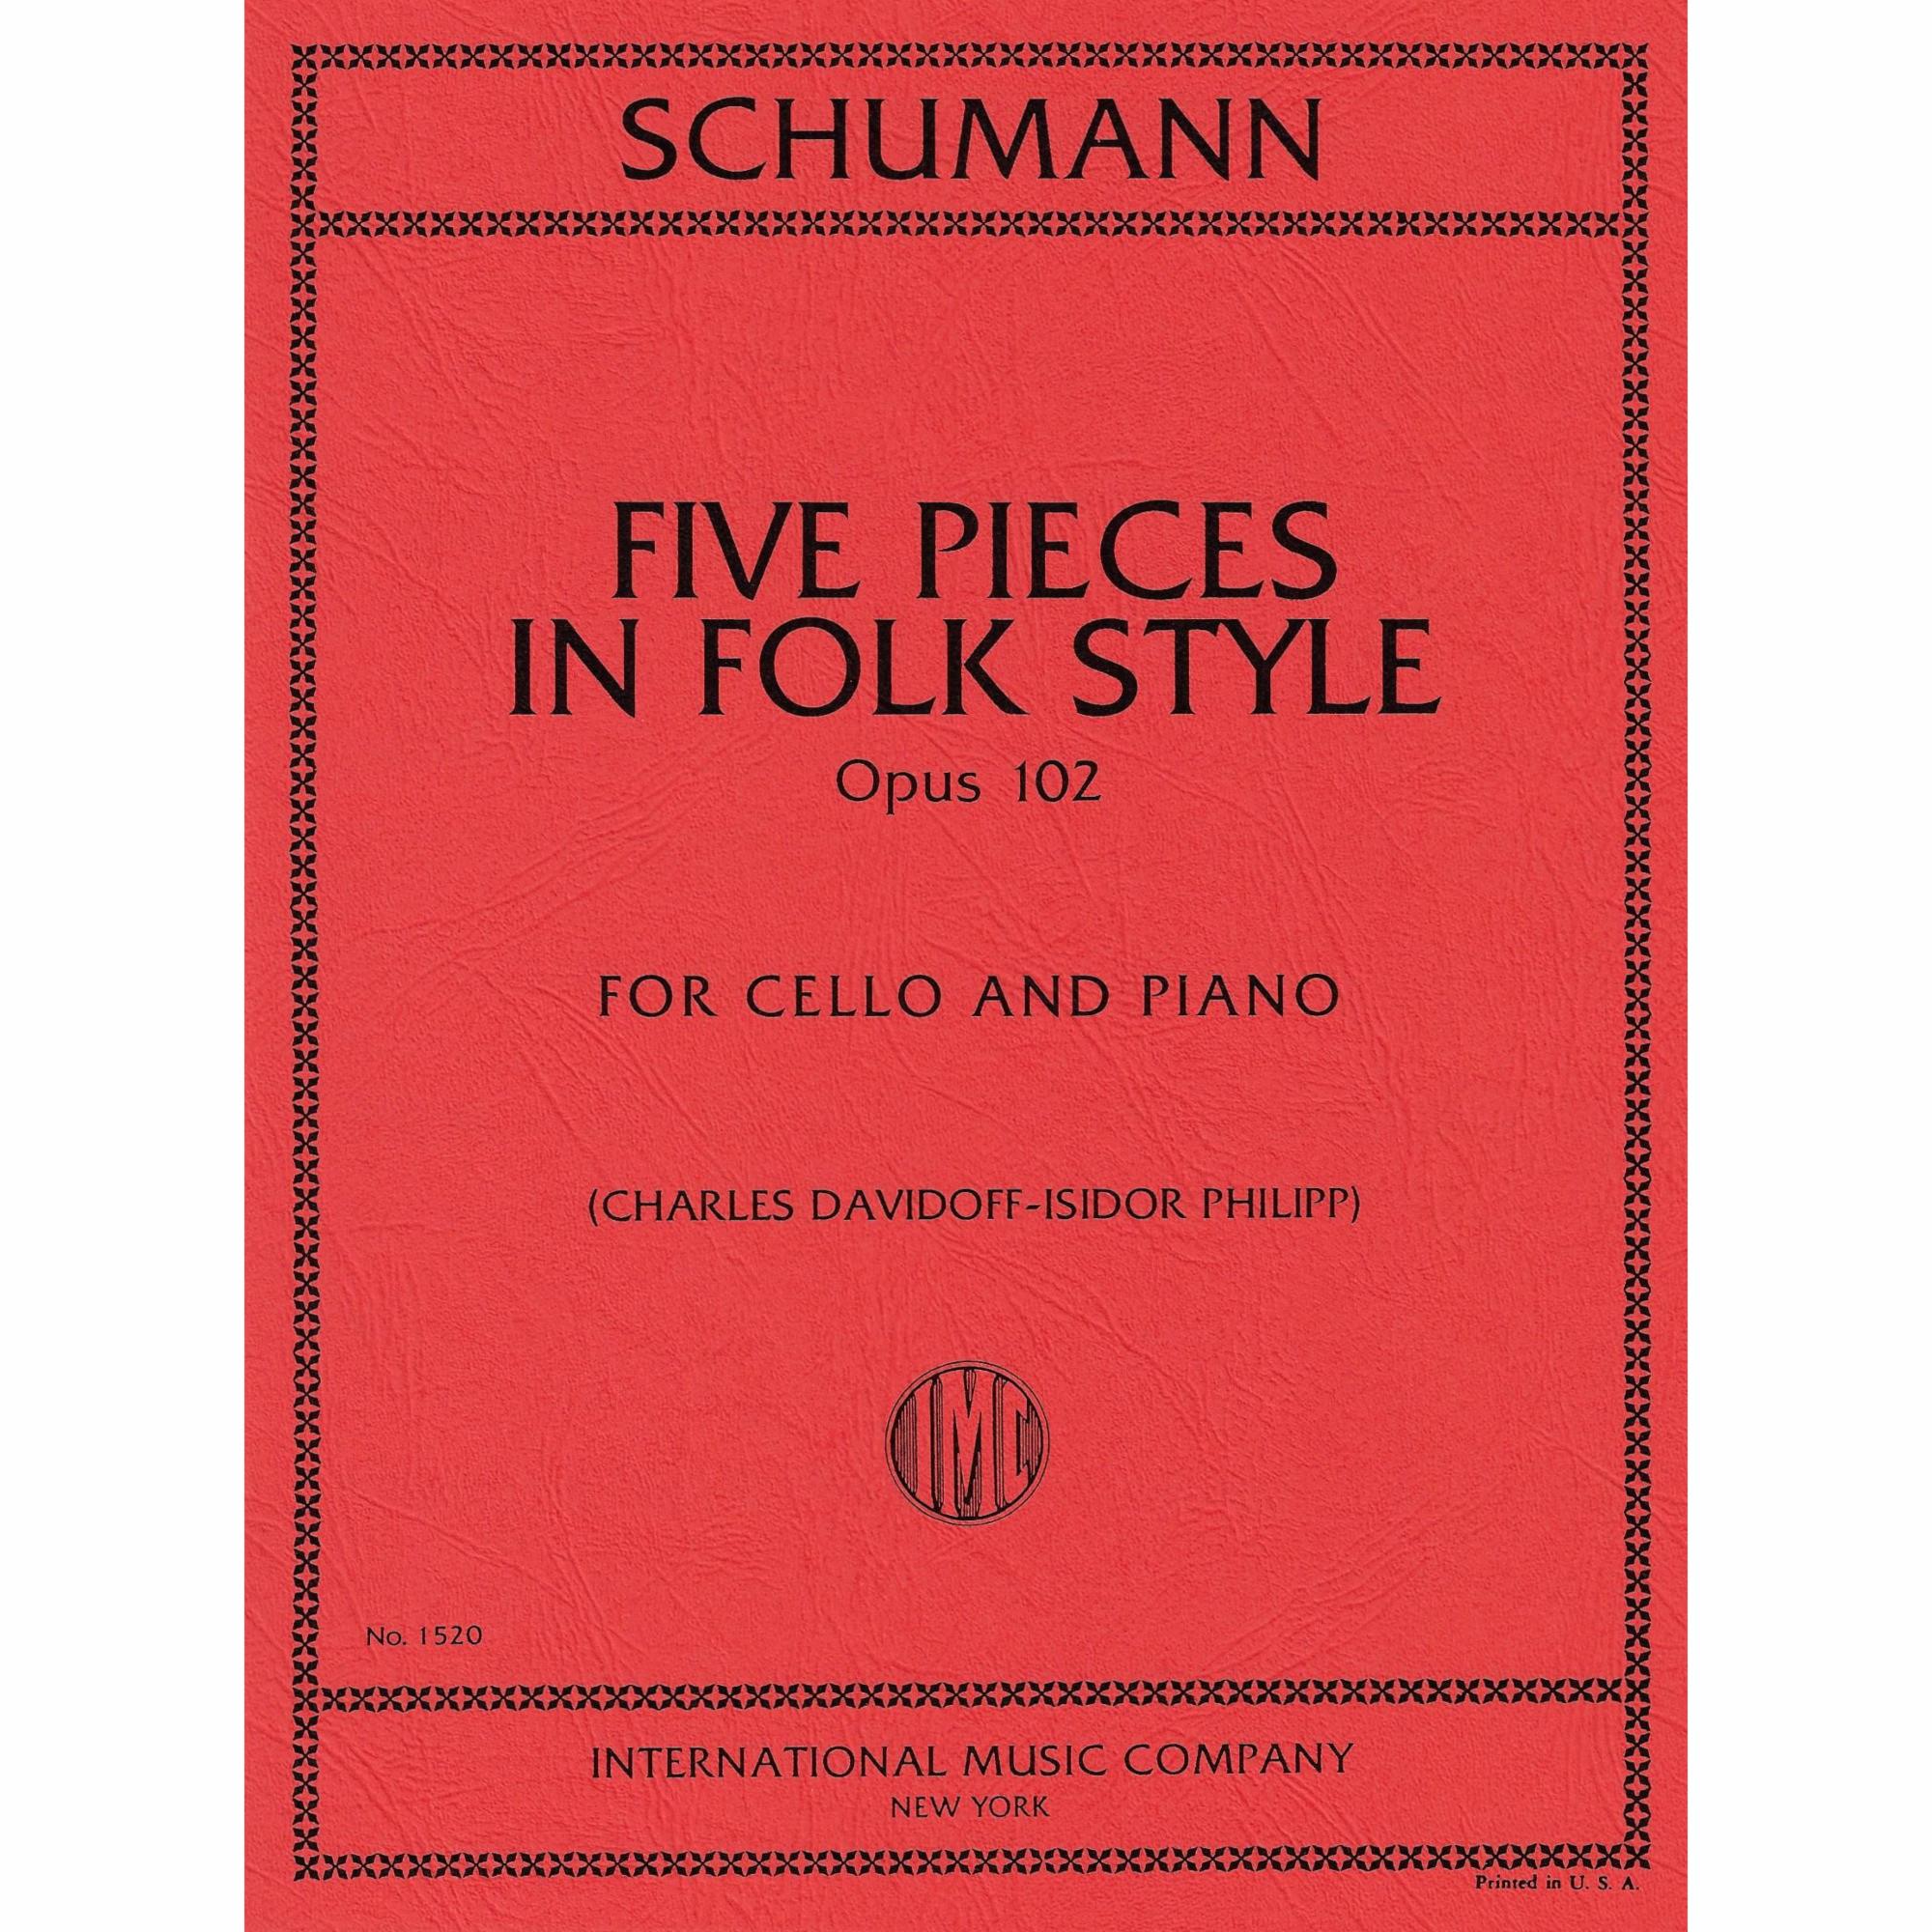 Five Pieces in Folk Style, Op. 102 for Cello and Piano